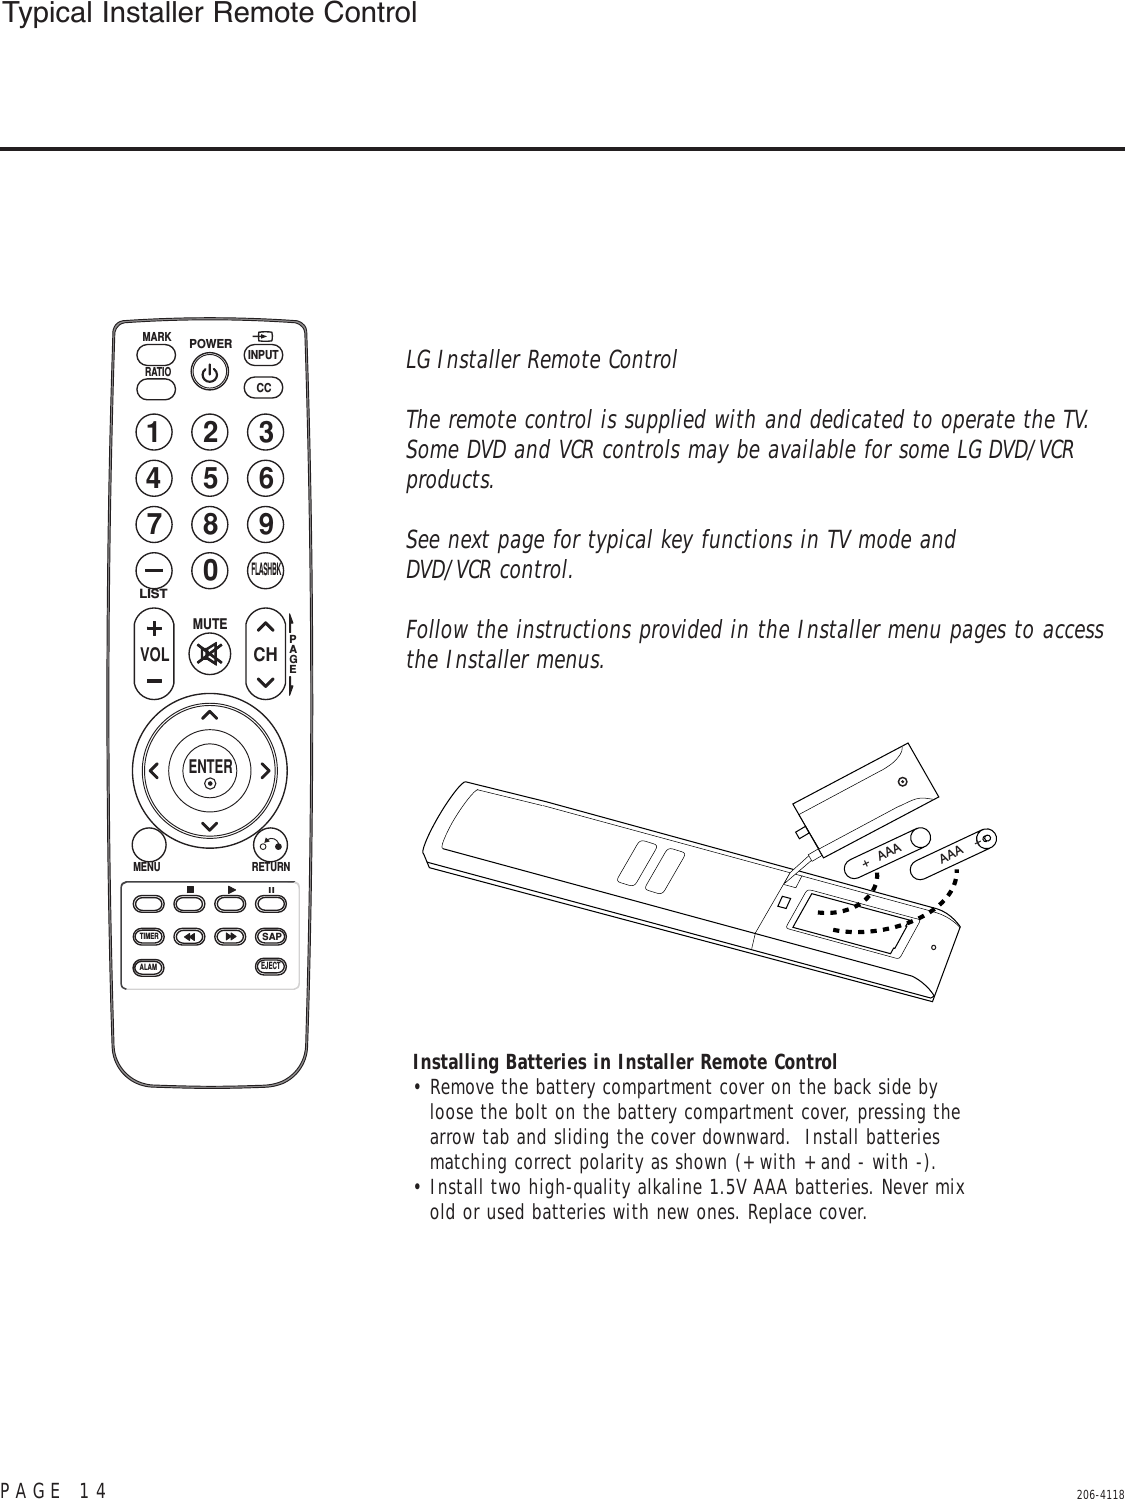 206-4118Typical Installer Remote ControlLG Installer Remote ControlThe remote control is supplied with and dedicated to operate the TV.Some DVD and VCR controls may be available for some LG DVD/VCRproducts. See next page for typical key functions in TV mode and DVD/VCR control.Follow the instructions provided in the Installer menu pages to accessthe Installer menus.Installing Batteries in Installer Remote Control• Remove the battery compartment cover on the back side byloose the bolt on the battery compartment cover, pressing thearrow tab and sliding the cover downward.  Install batteriesmatching correct polarity as shown (+ with + and - with -).• Install two high-quality alkaline 1.5V AAA batteries. Never mixold or used batteries with new ones. Replace cover.+   AAA   AAA    + MENULIST1234567809FLASHBKMUTEVOLCHPAGERETURNMARKENTERINPUTPOWERRATIOCCTIMERALAMSAPEJECTPAGE 14